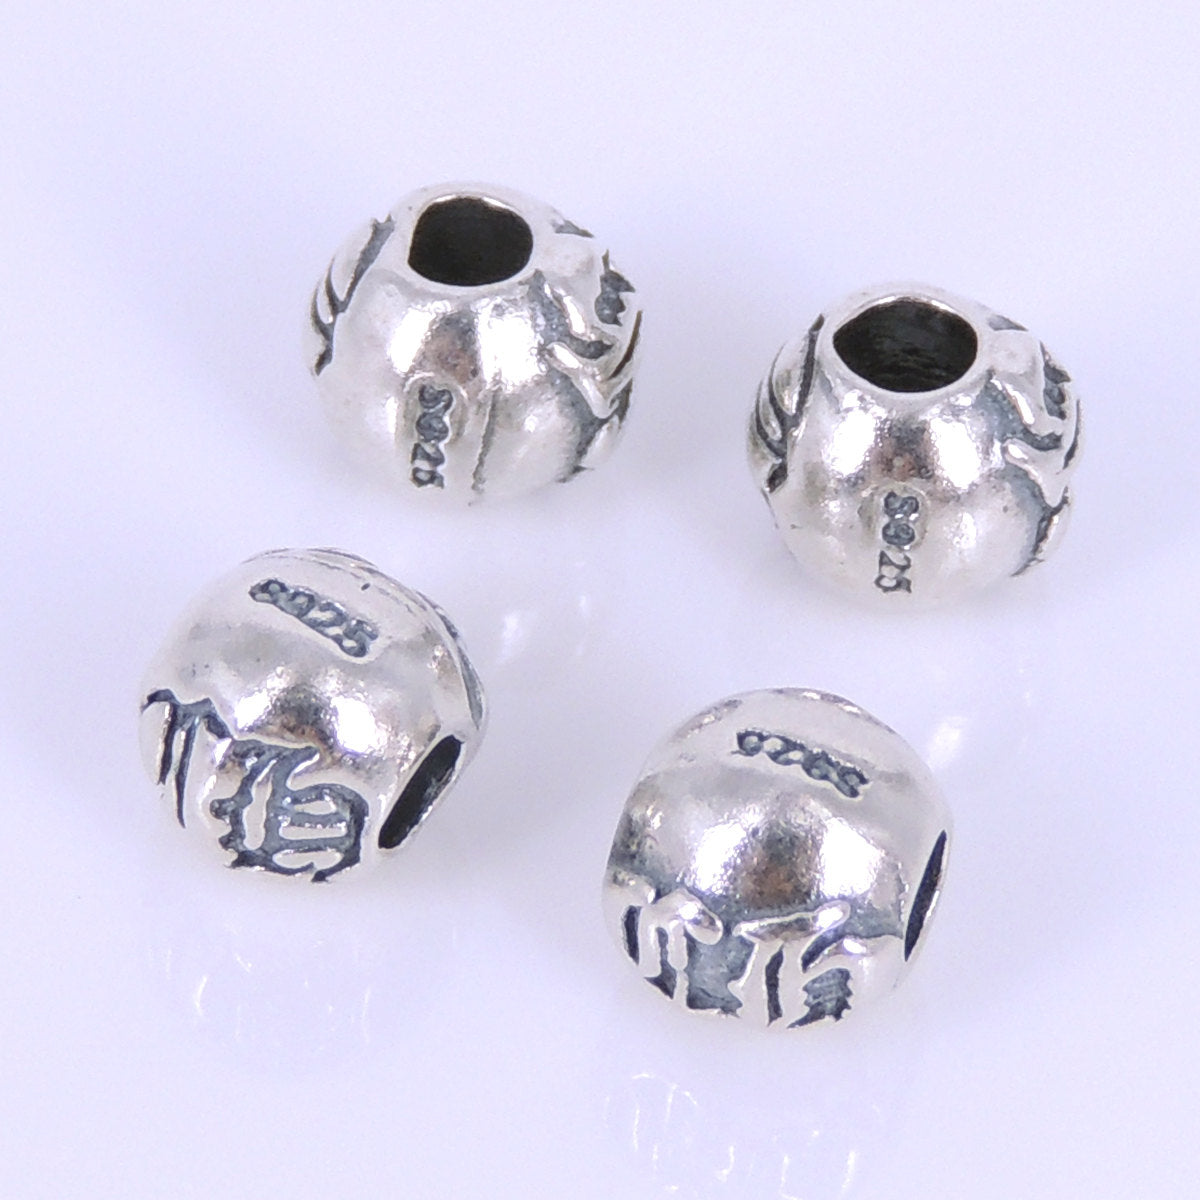 6 PCS Vintage Gothic Beads - S925 Sterling Silver WSP273X6